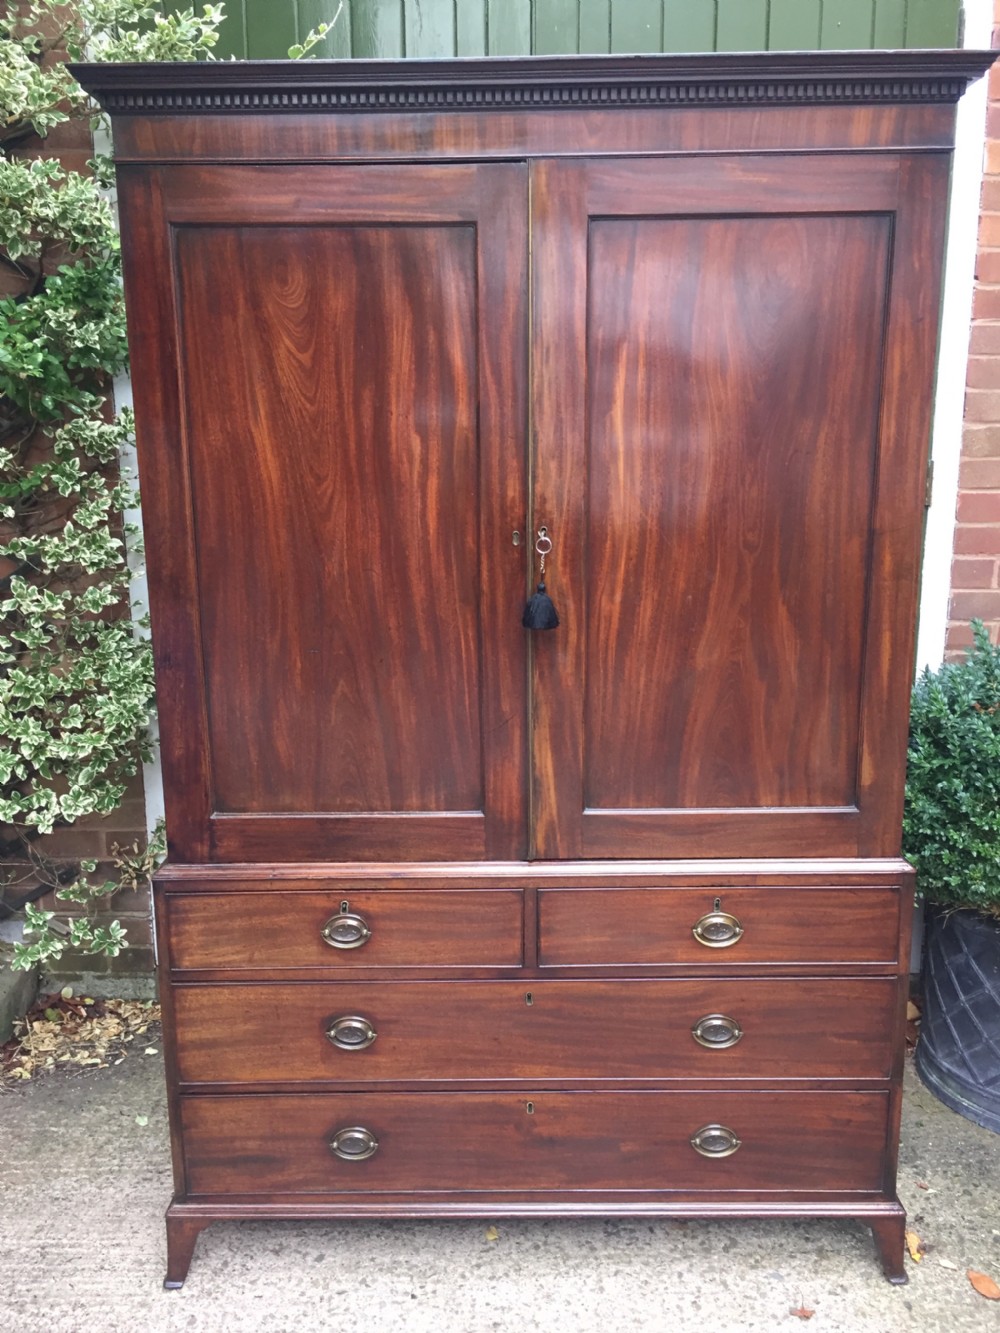 late c18th george iii period mahogany linen press wardrobe attributed to gillows of lancaster